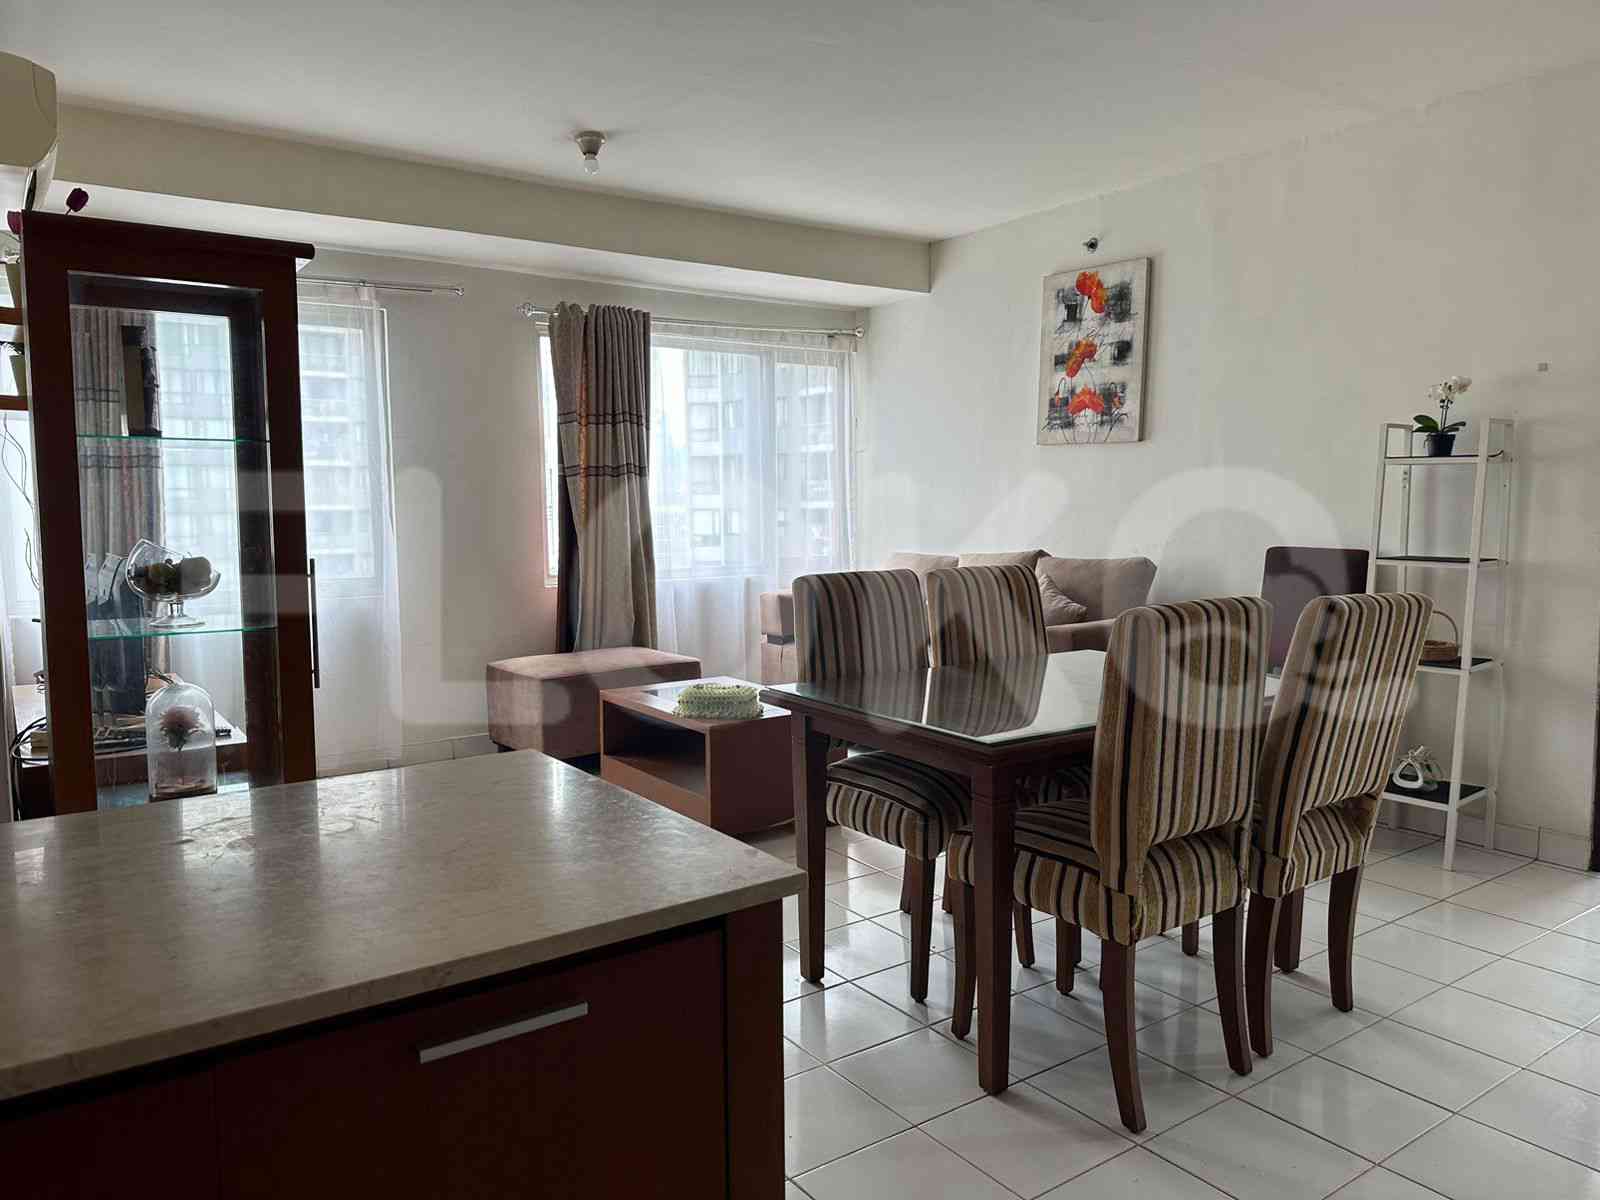 64 sqm, 19th floor, 2 BR apartment for sale in Kuningan 4